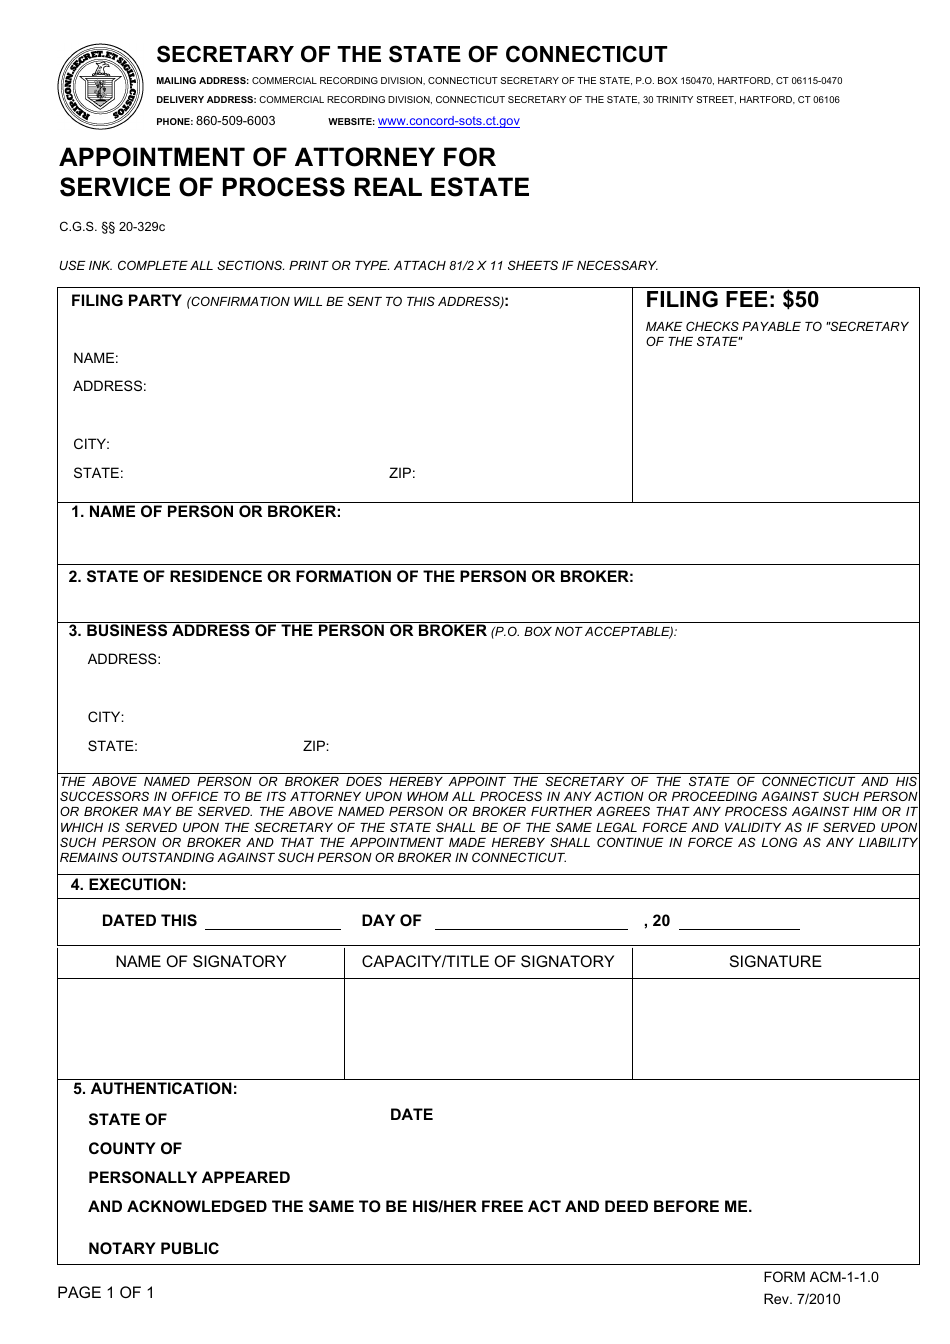 Form ACM-1-1.0 Appointment of Attorney for Service of Process Real Estate - Connecticut, Page 1